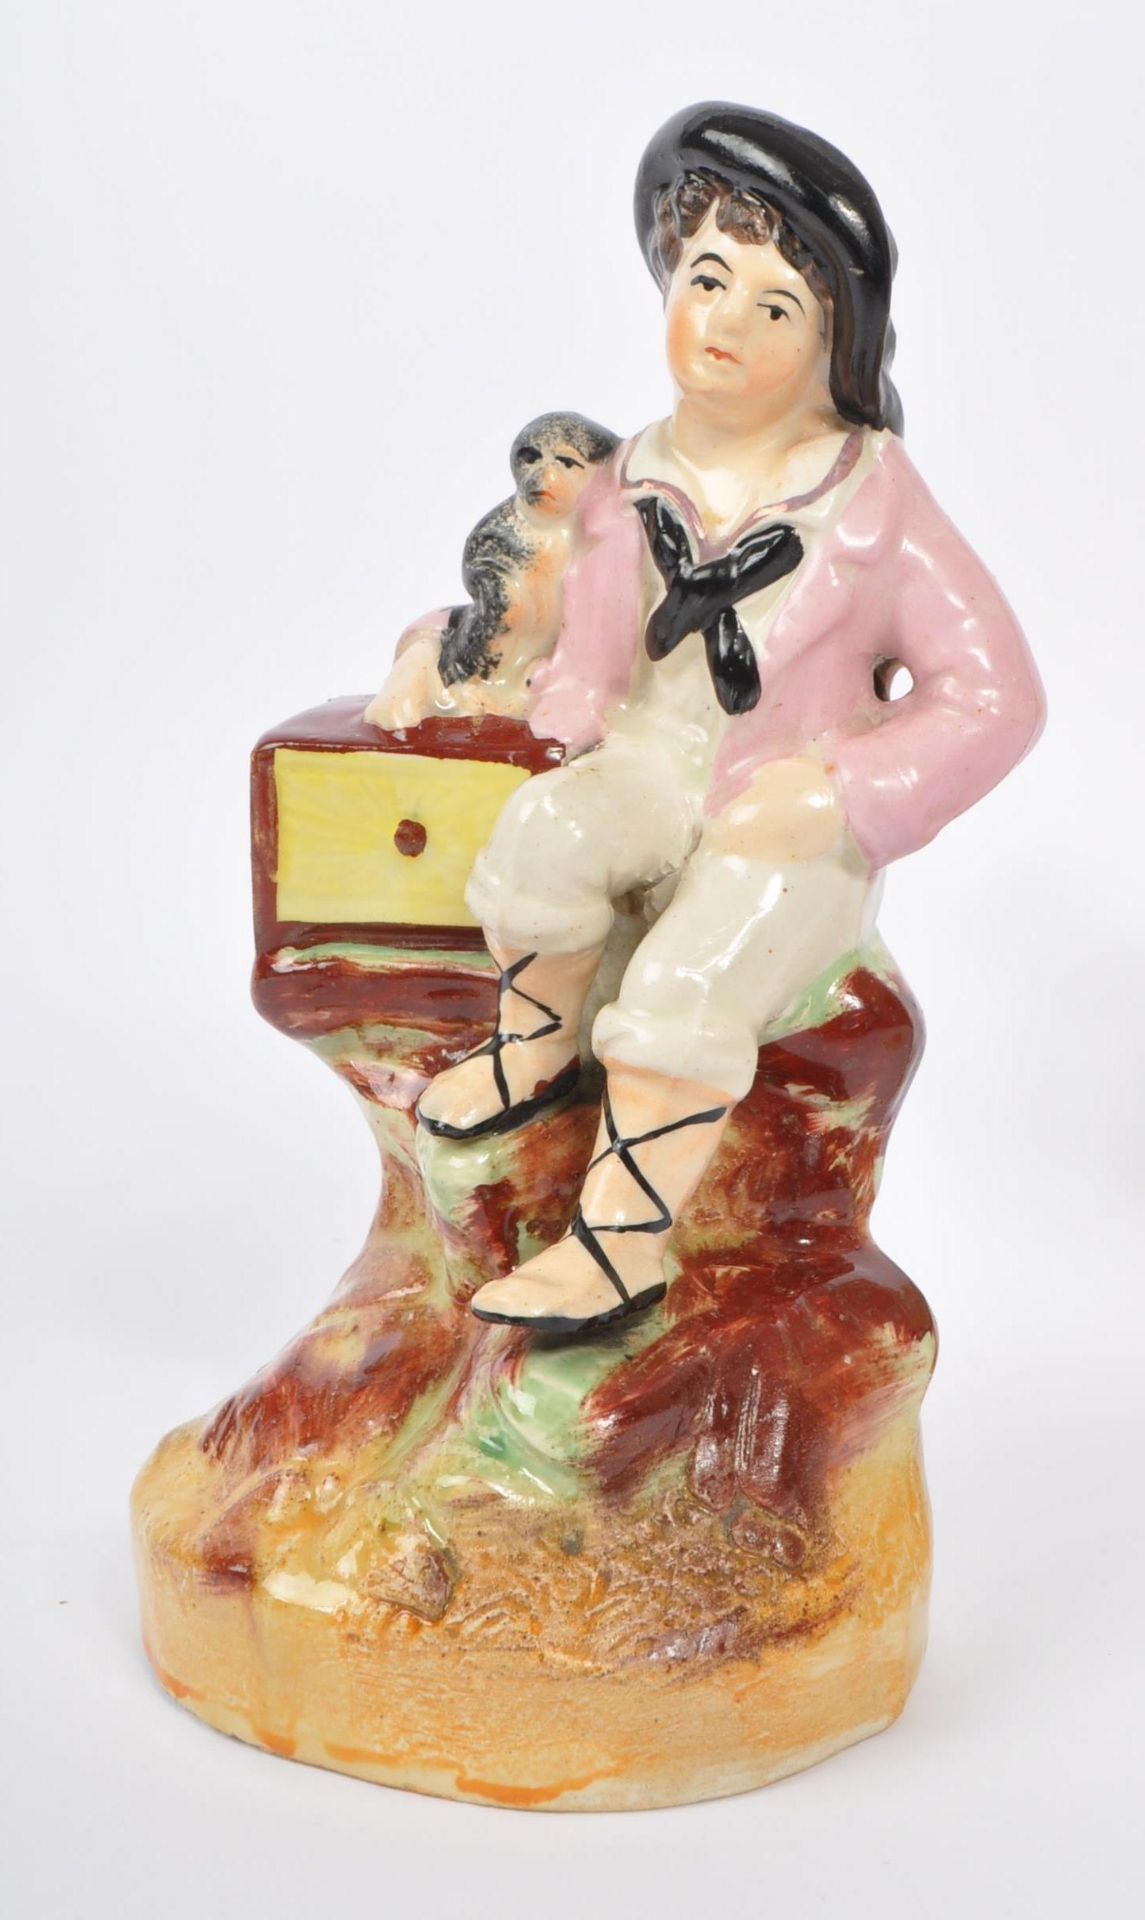 PAIR OF 19TH CENTURY VICTORIAN STAFFORDSHIRE FIGURES - Image 3 of 4